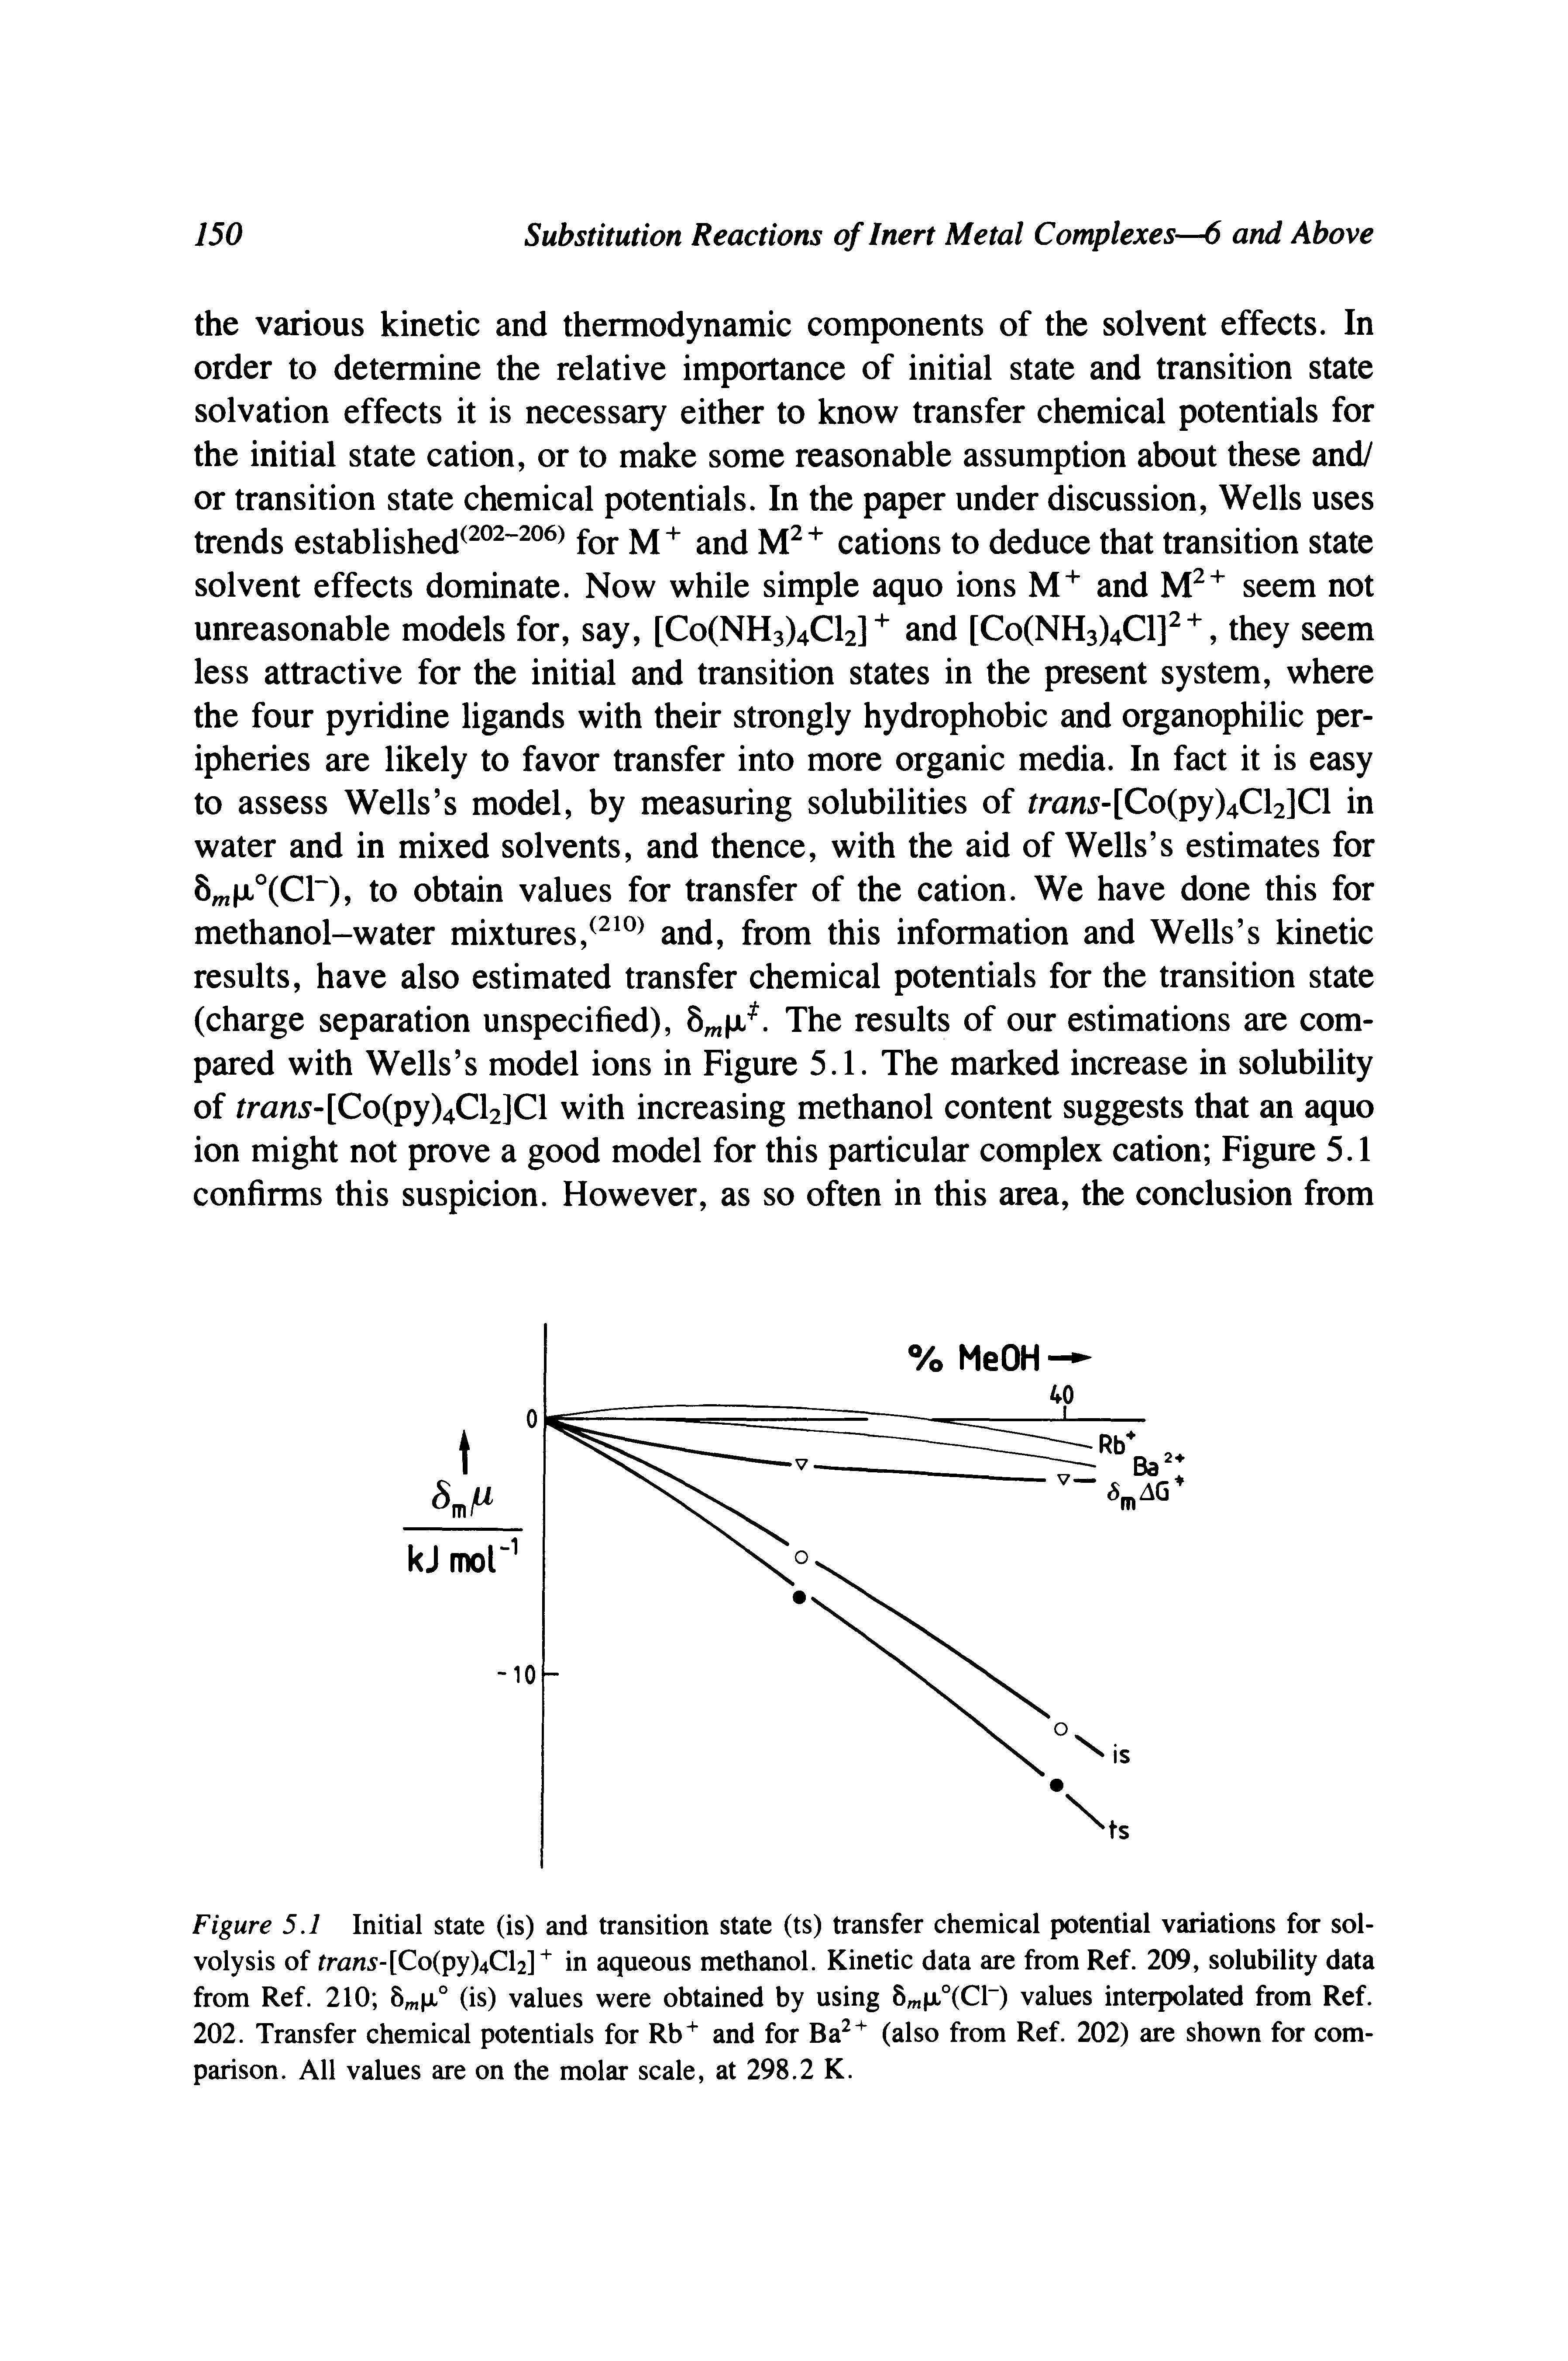 Figure 5.1 Initial state (is) and transition state (ts) transfer chemical potential variations for solvolysis of trans- Coipy)4,C in aqueous methanol. Kinetic data are from Ref. 209, solubility data from Ref. 210 (is) values were obtained by using 8 , x°(Cl") values interpolated from Ref. 202. Transfer chemical potentials for Rb" and for Ba " (also from Ref. 202) are shown for comparison. All values are on the molar scale, at 298.2 K.